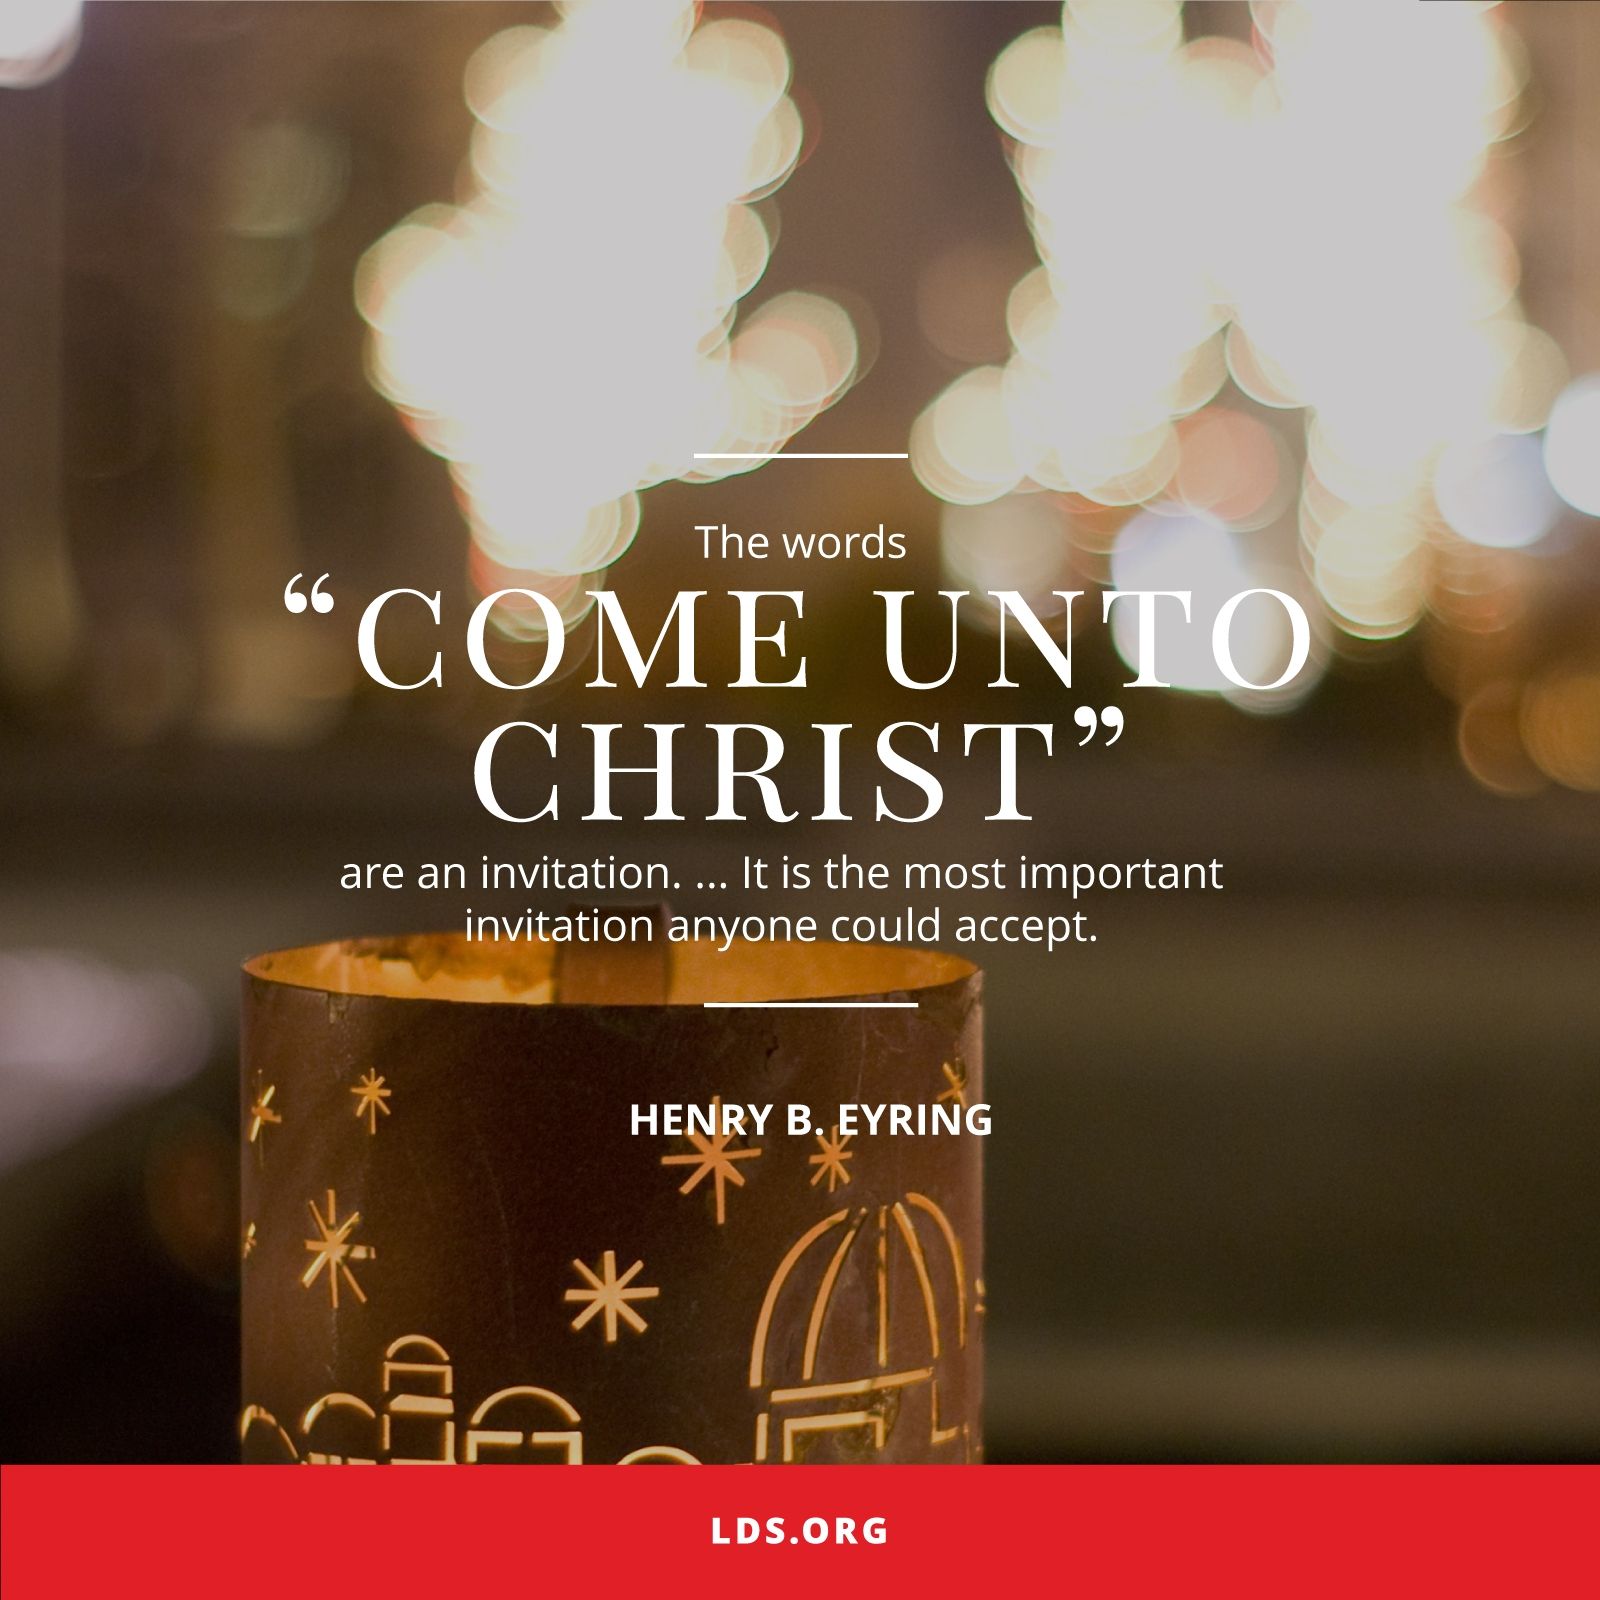 “The words ‘Come unto Christ’ are an invitation. ... It is the most important invitation anyone could accept.”—President Henry B. Eyring, “Come unto Christ” © undefined ipCode 1.